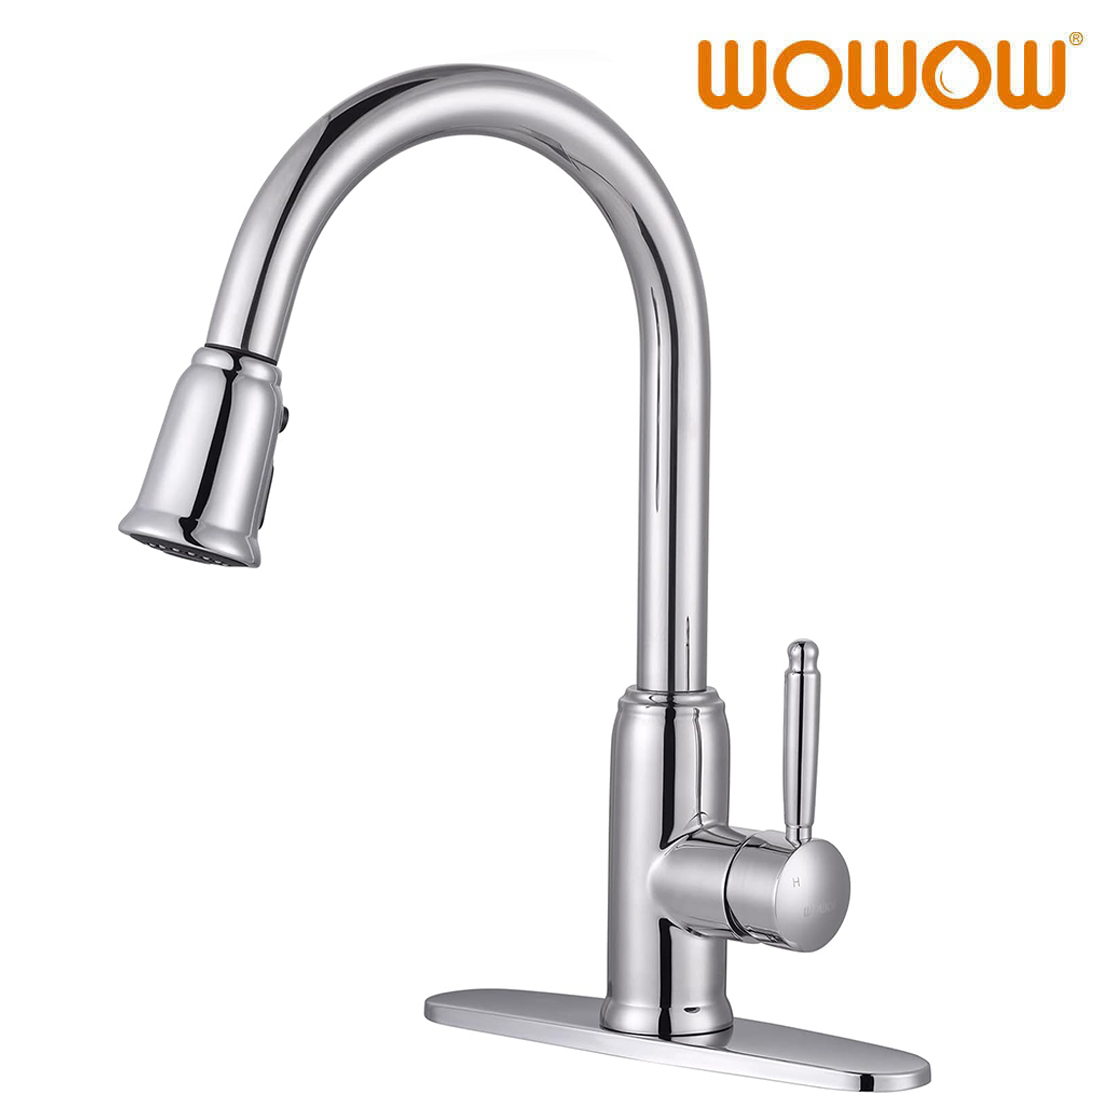 Chrome Pull Down Kitchen Faucet